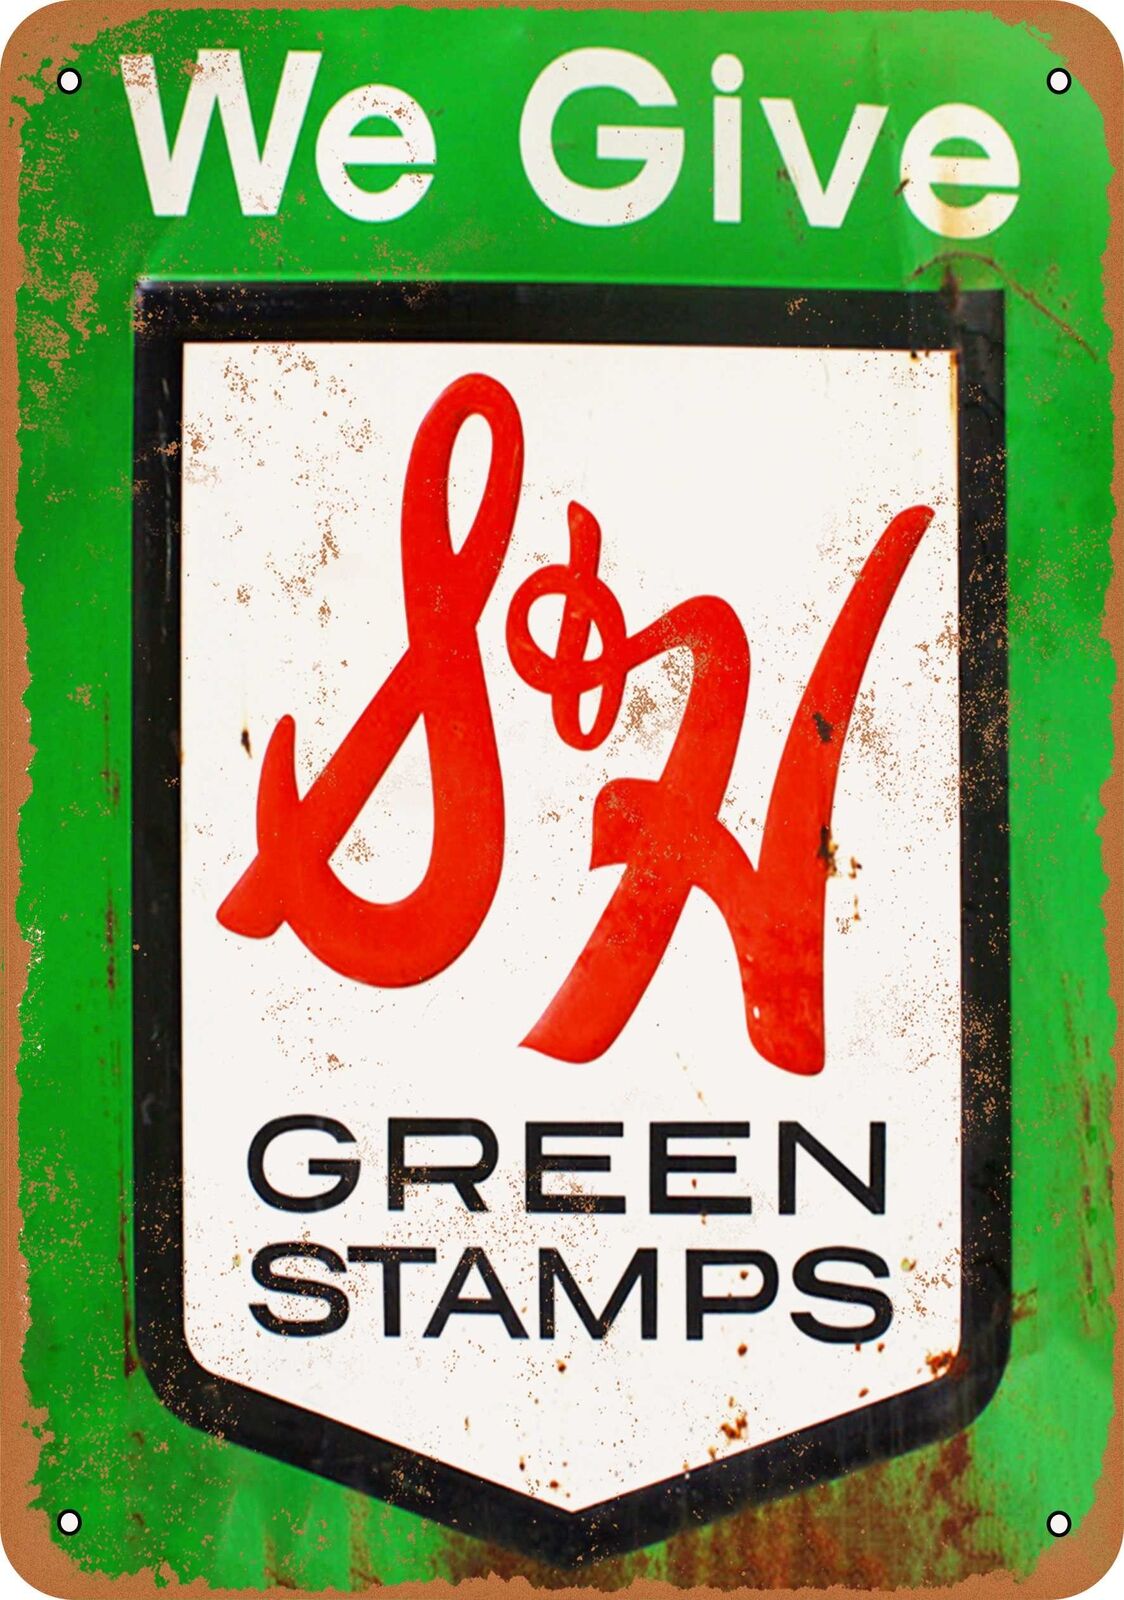 Metal Sign - S&H Green Stamps - Vintage Look Reproduction